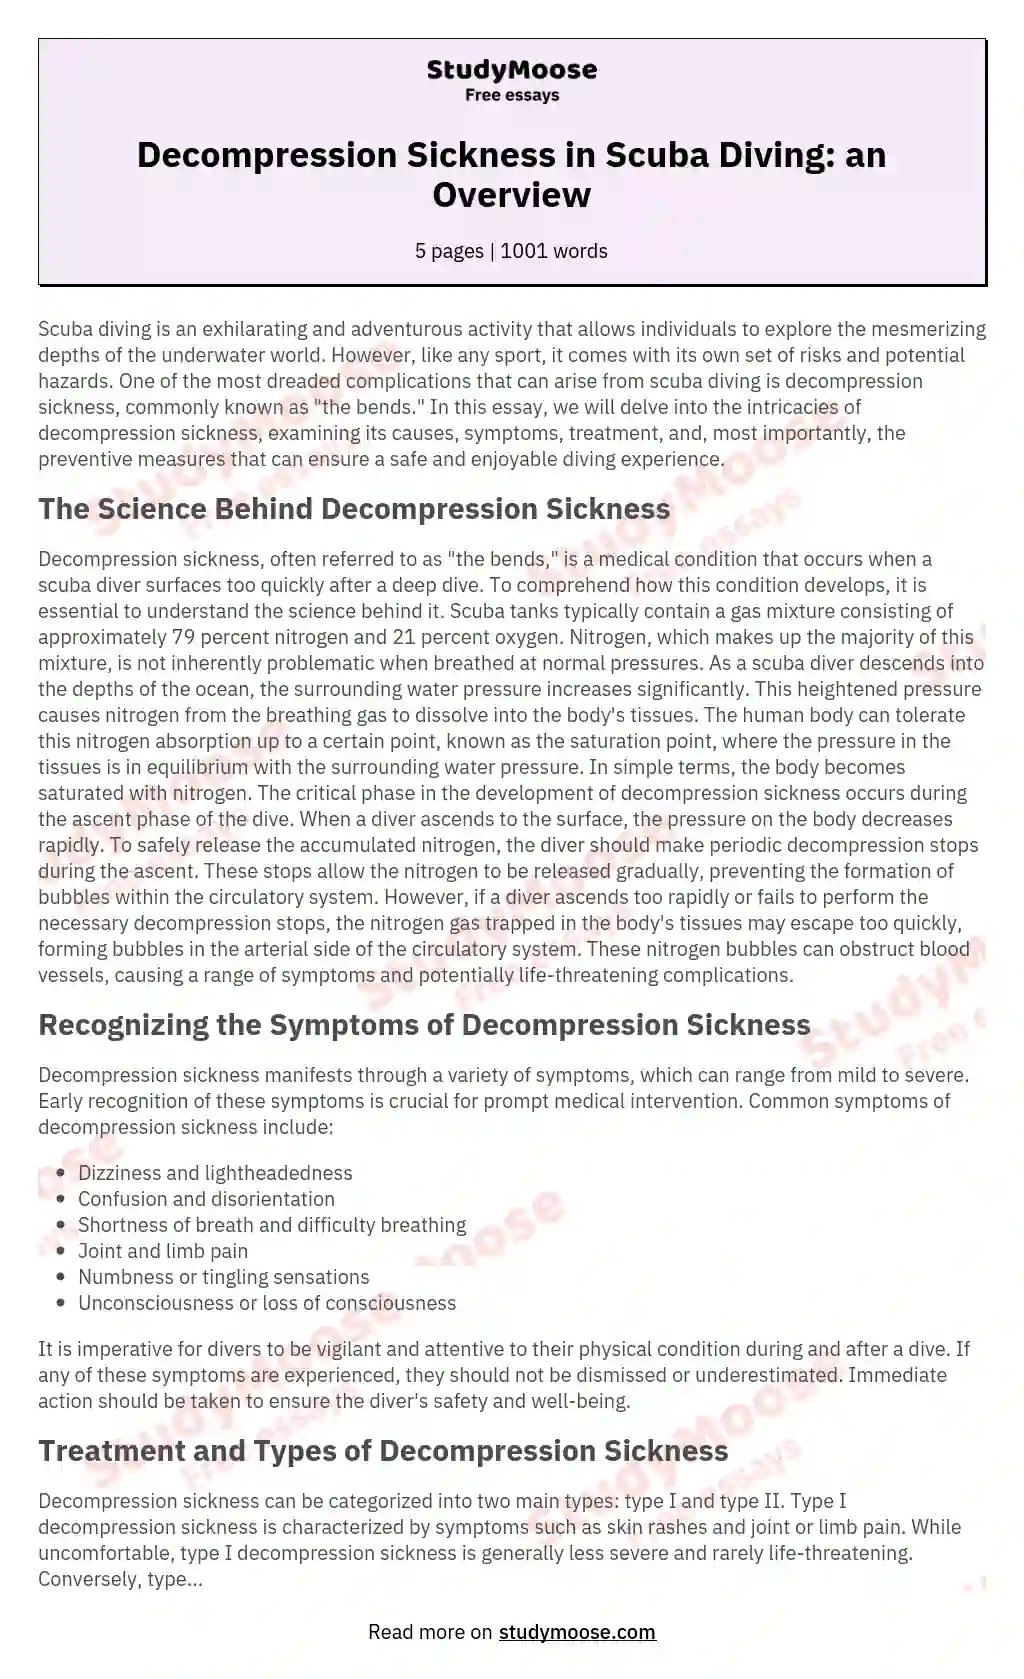 Decompression Sickness in Scuba Diving: an Overview essay